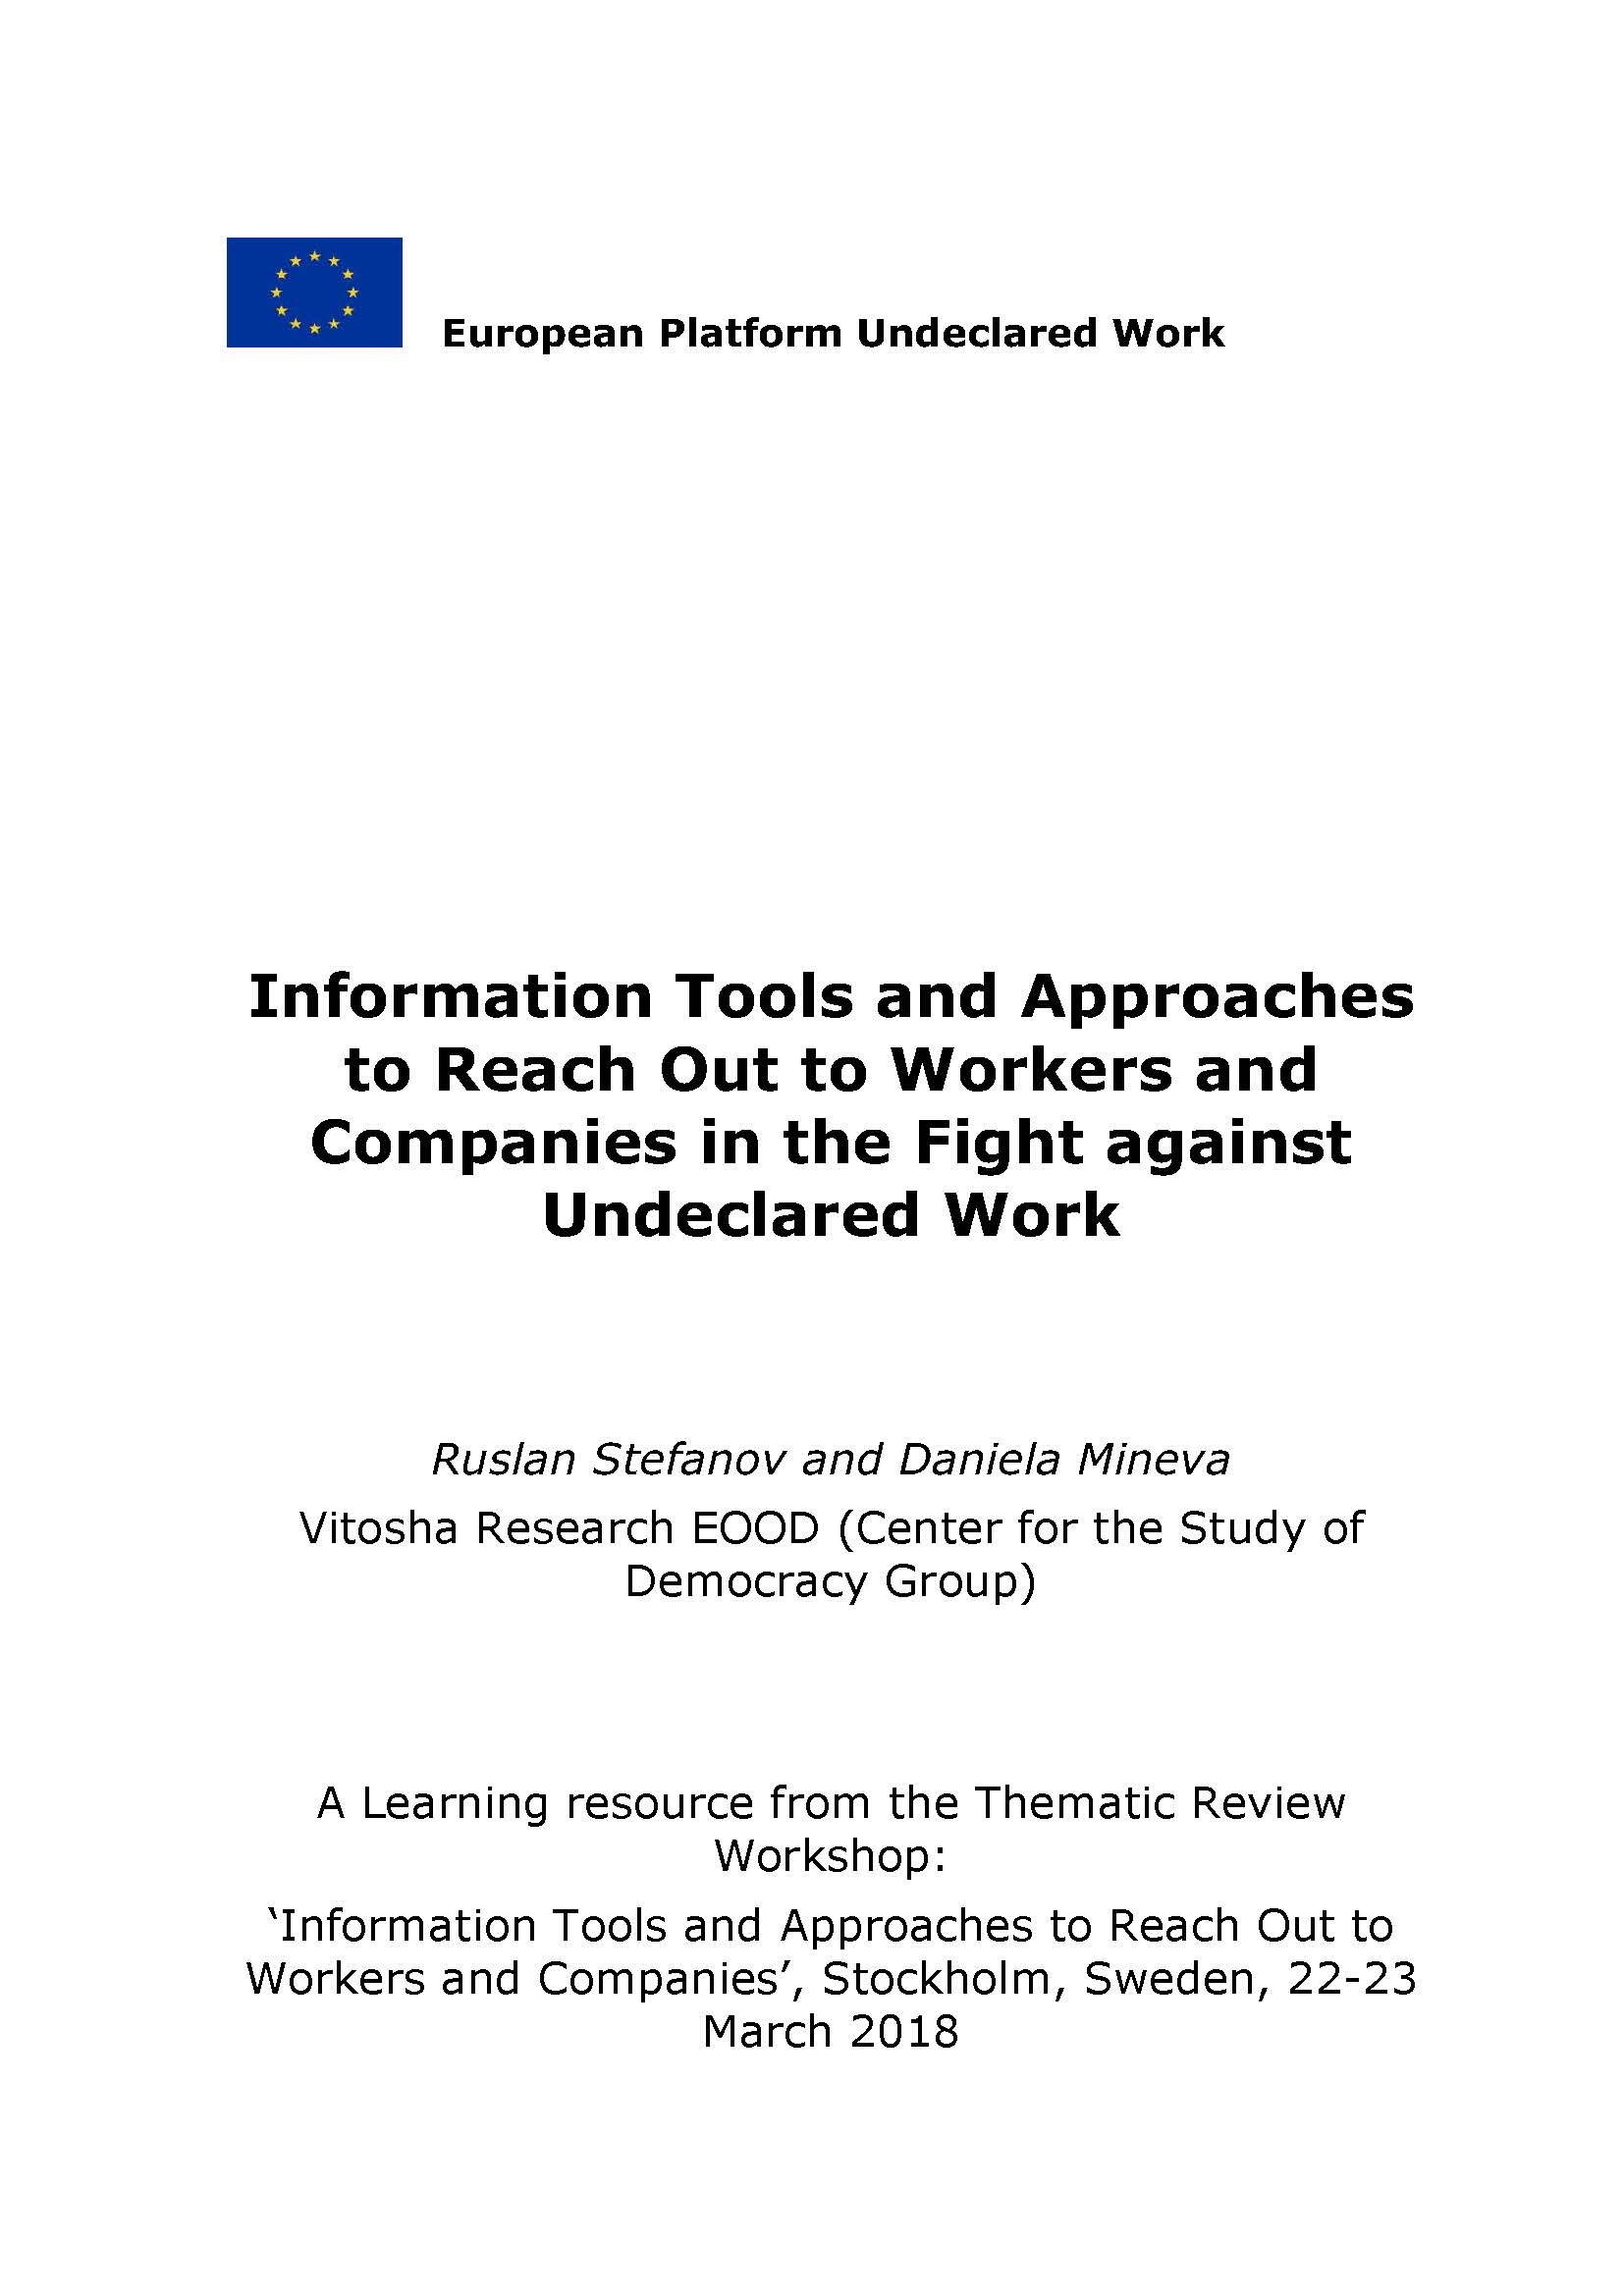 Information Tools and Approaches to Reach Out to Workers and Companies in the Fight against Undeclared Work Cover Image